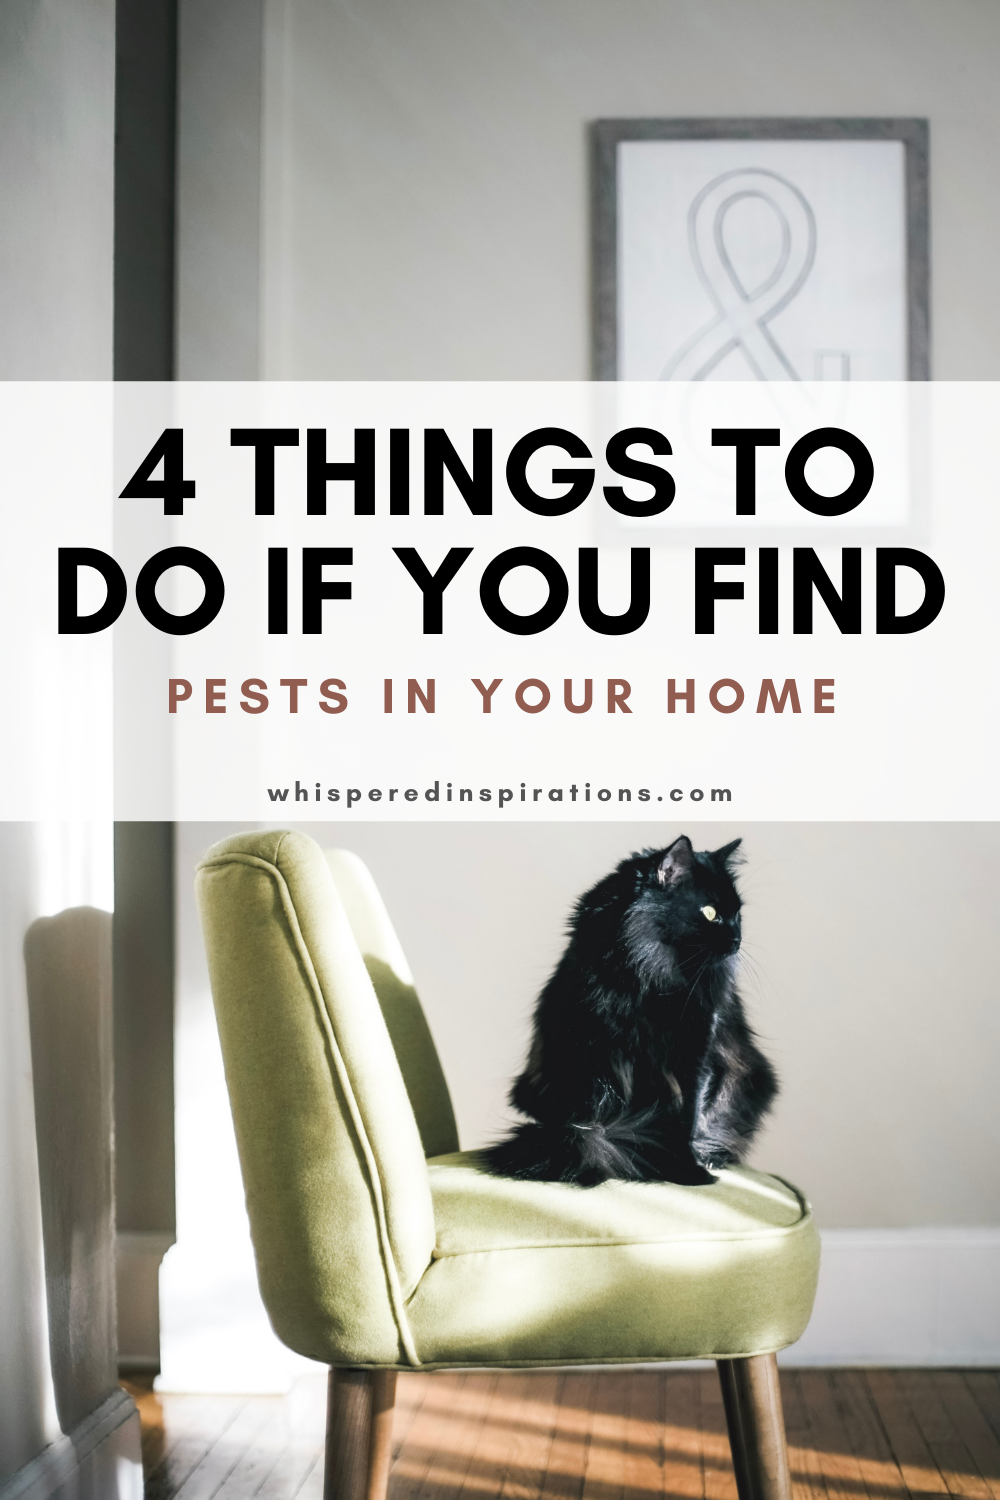 A cat lays on a comfy green chair taking in the sunlight. This article covers 4 things to do when you find pests in your home.